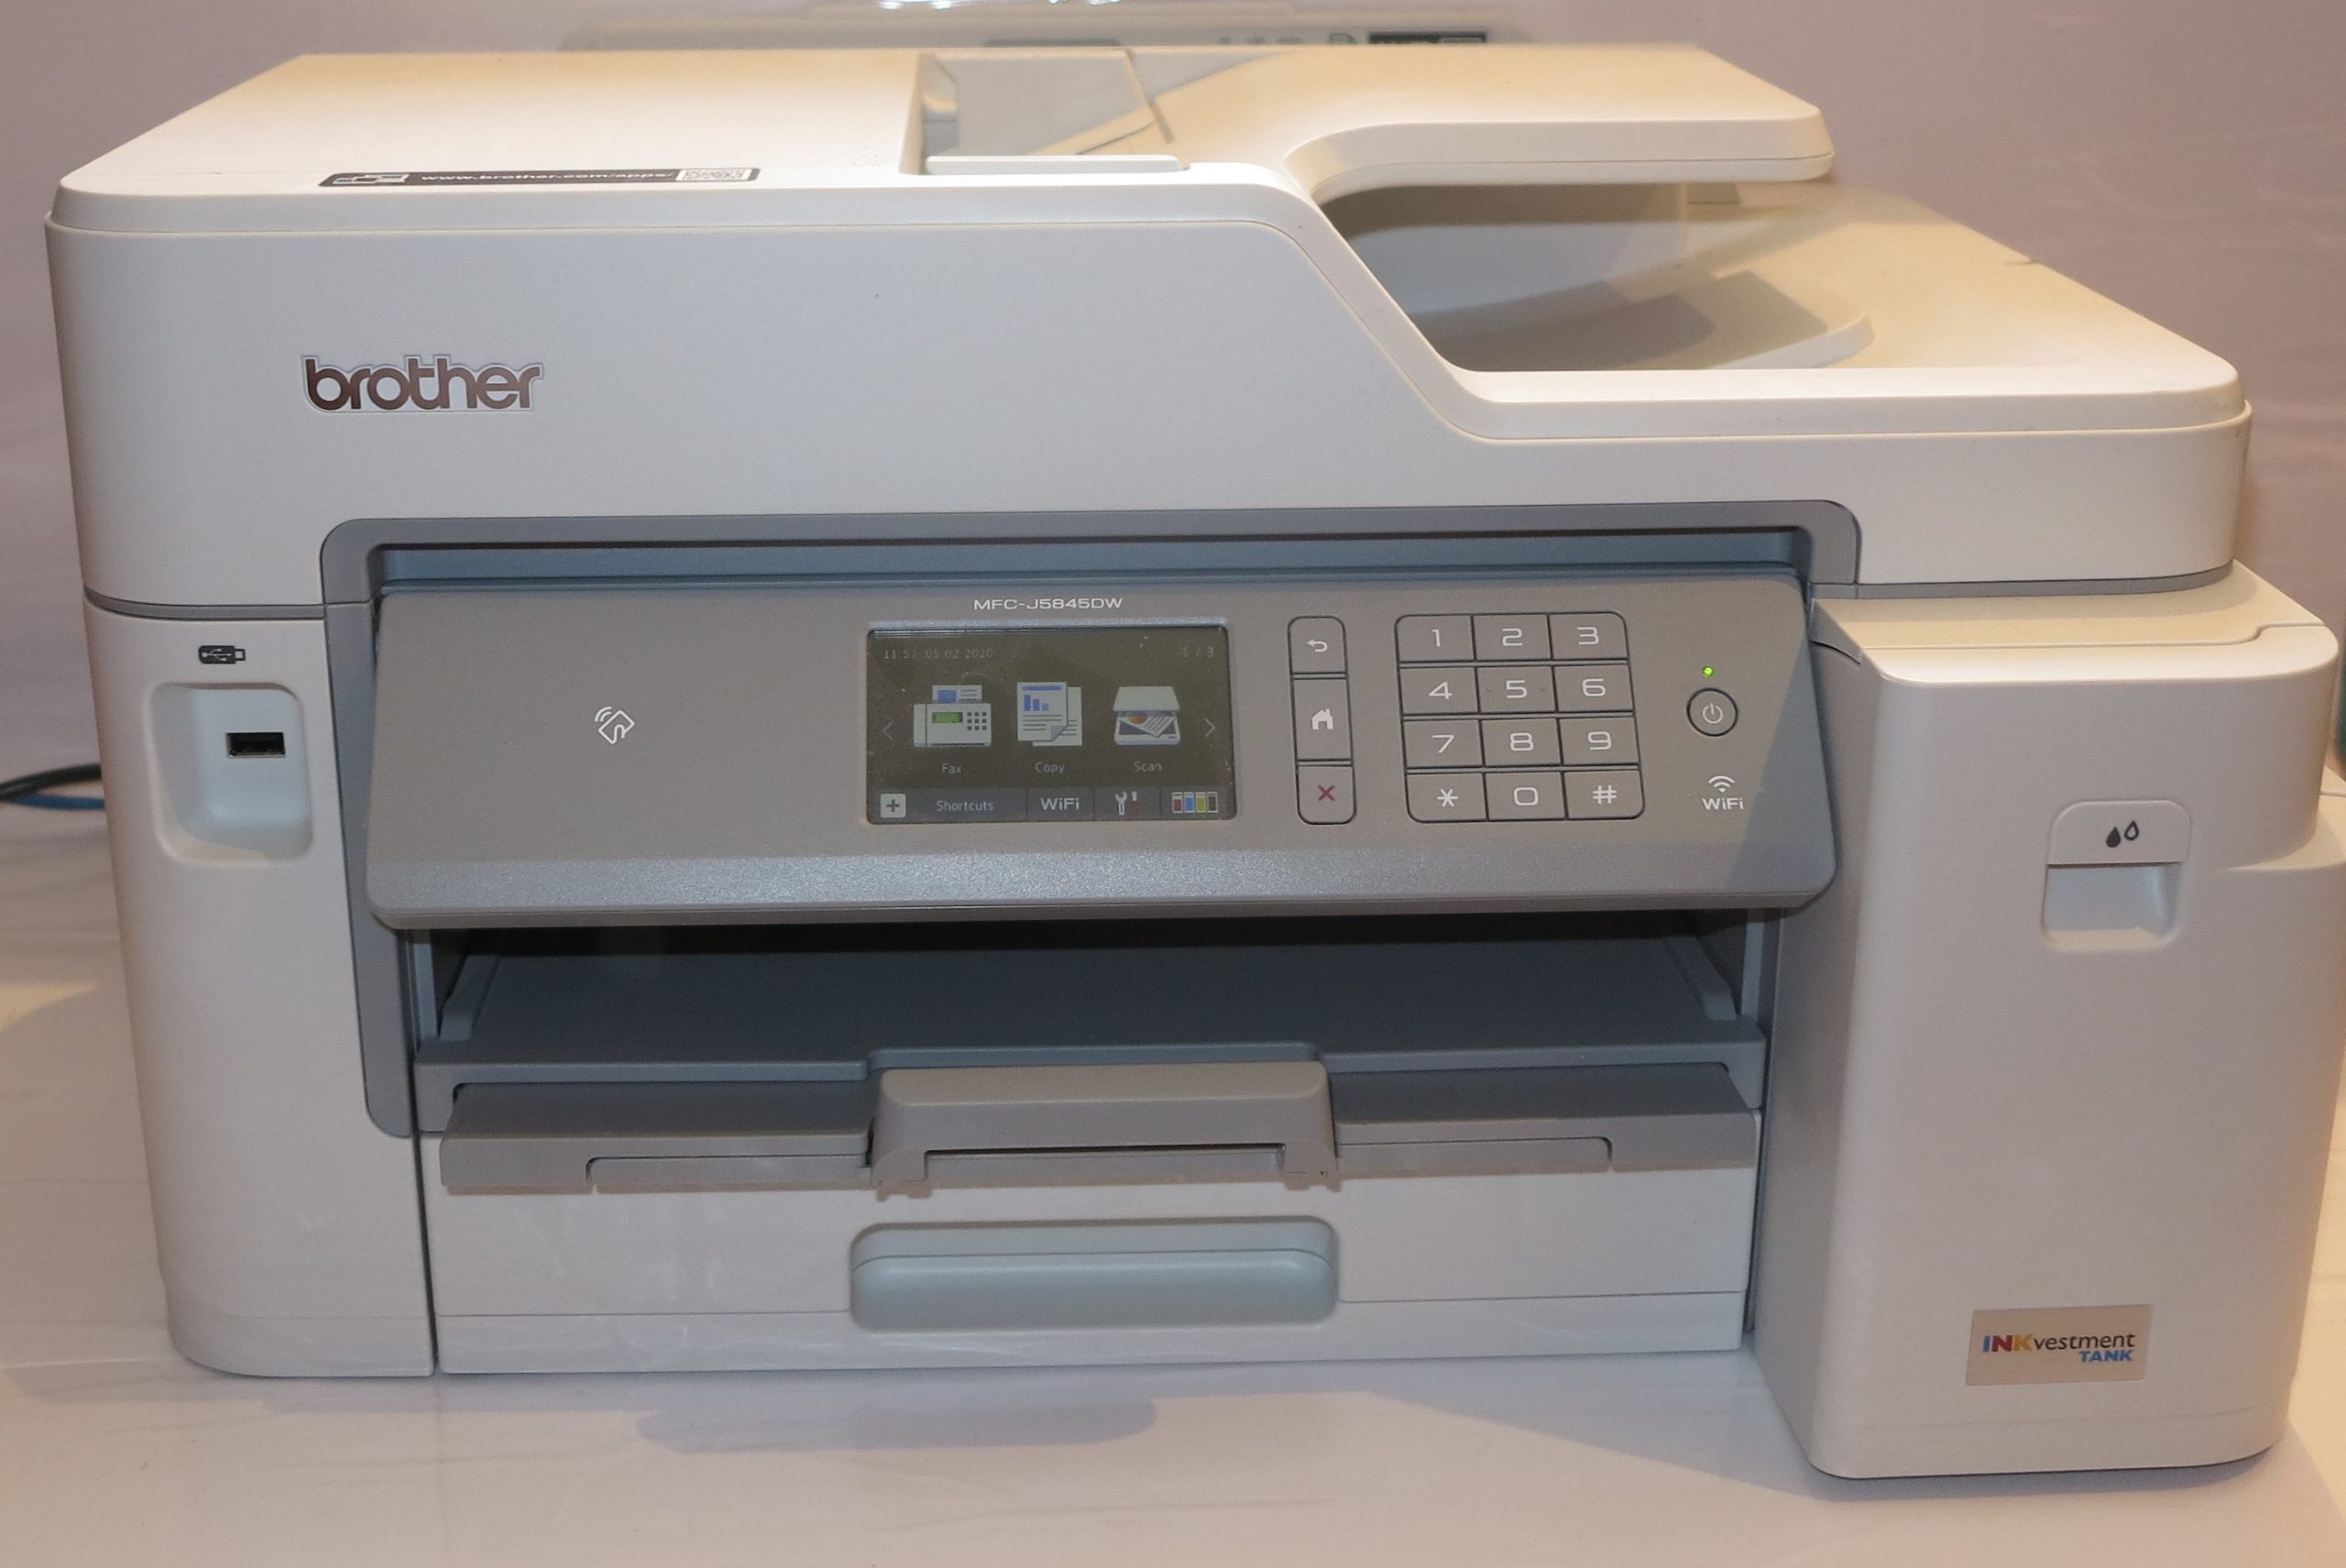 Product Review–Brother MFC-J5845DW INKVestment multifunction inkjet printer